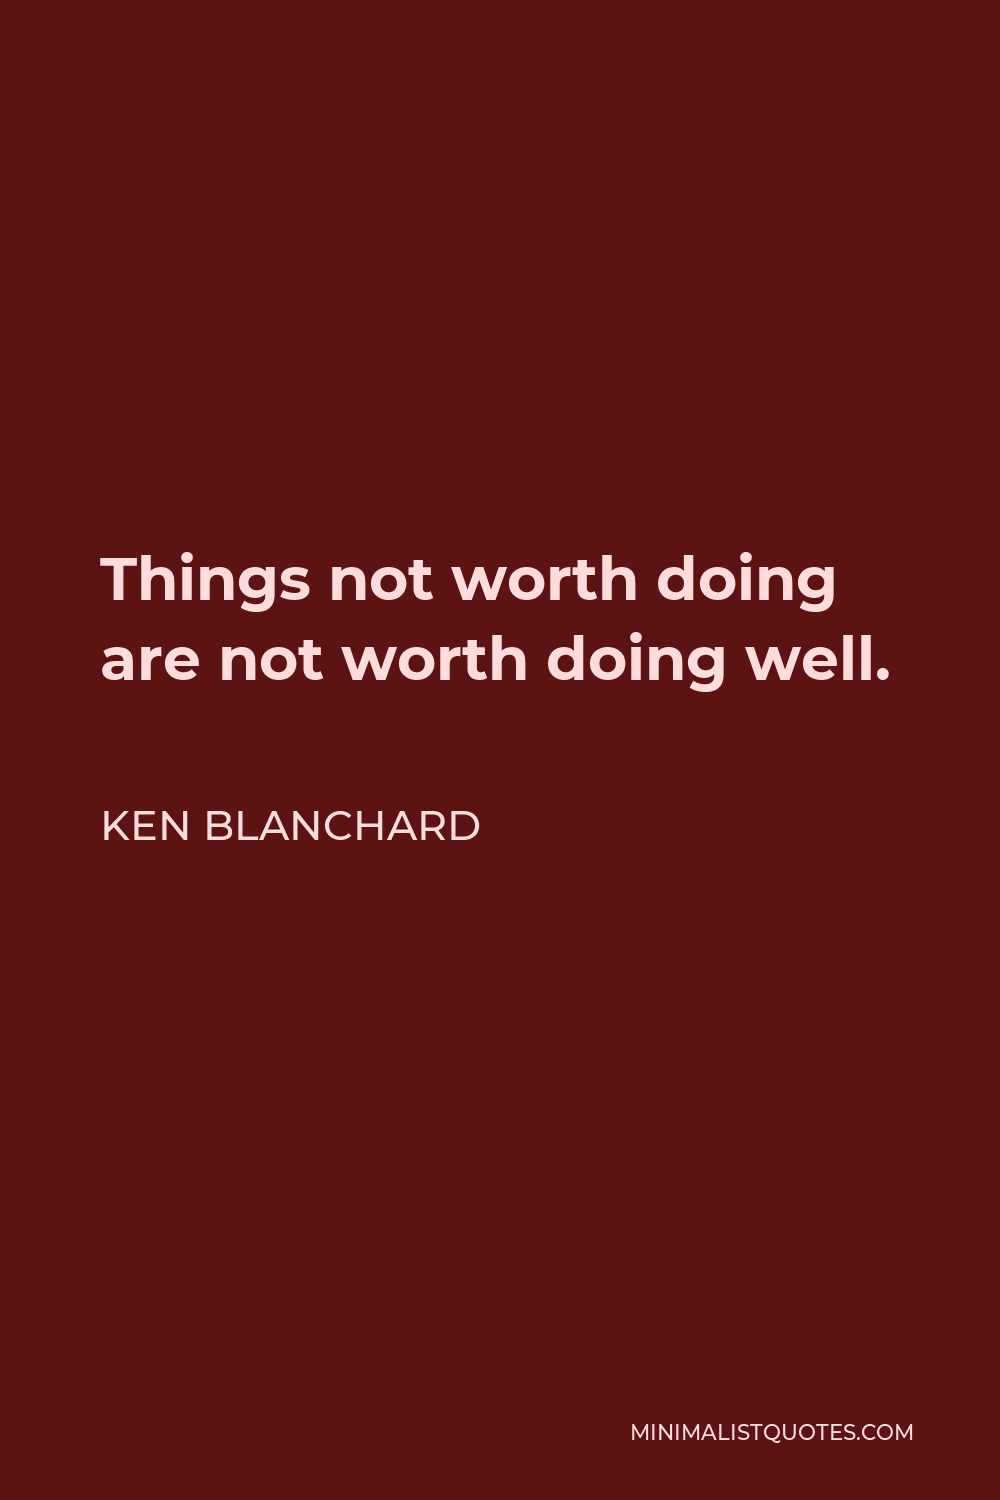 Ken Blanchard Quote - Things not worth doing are not worth doing well.